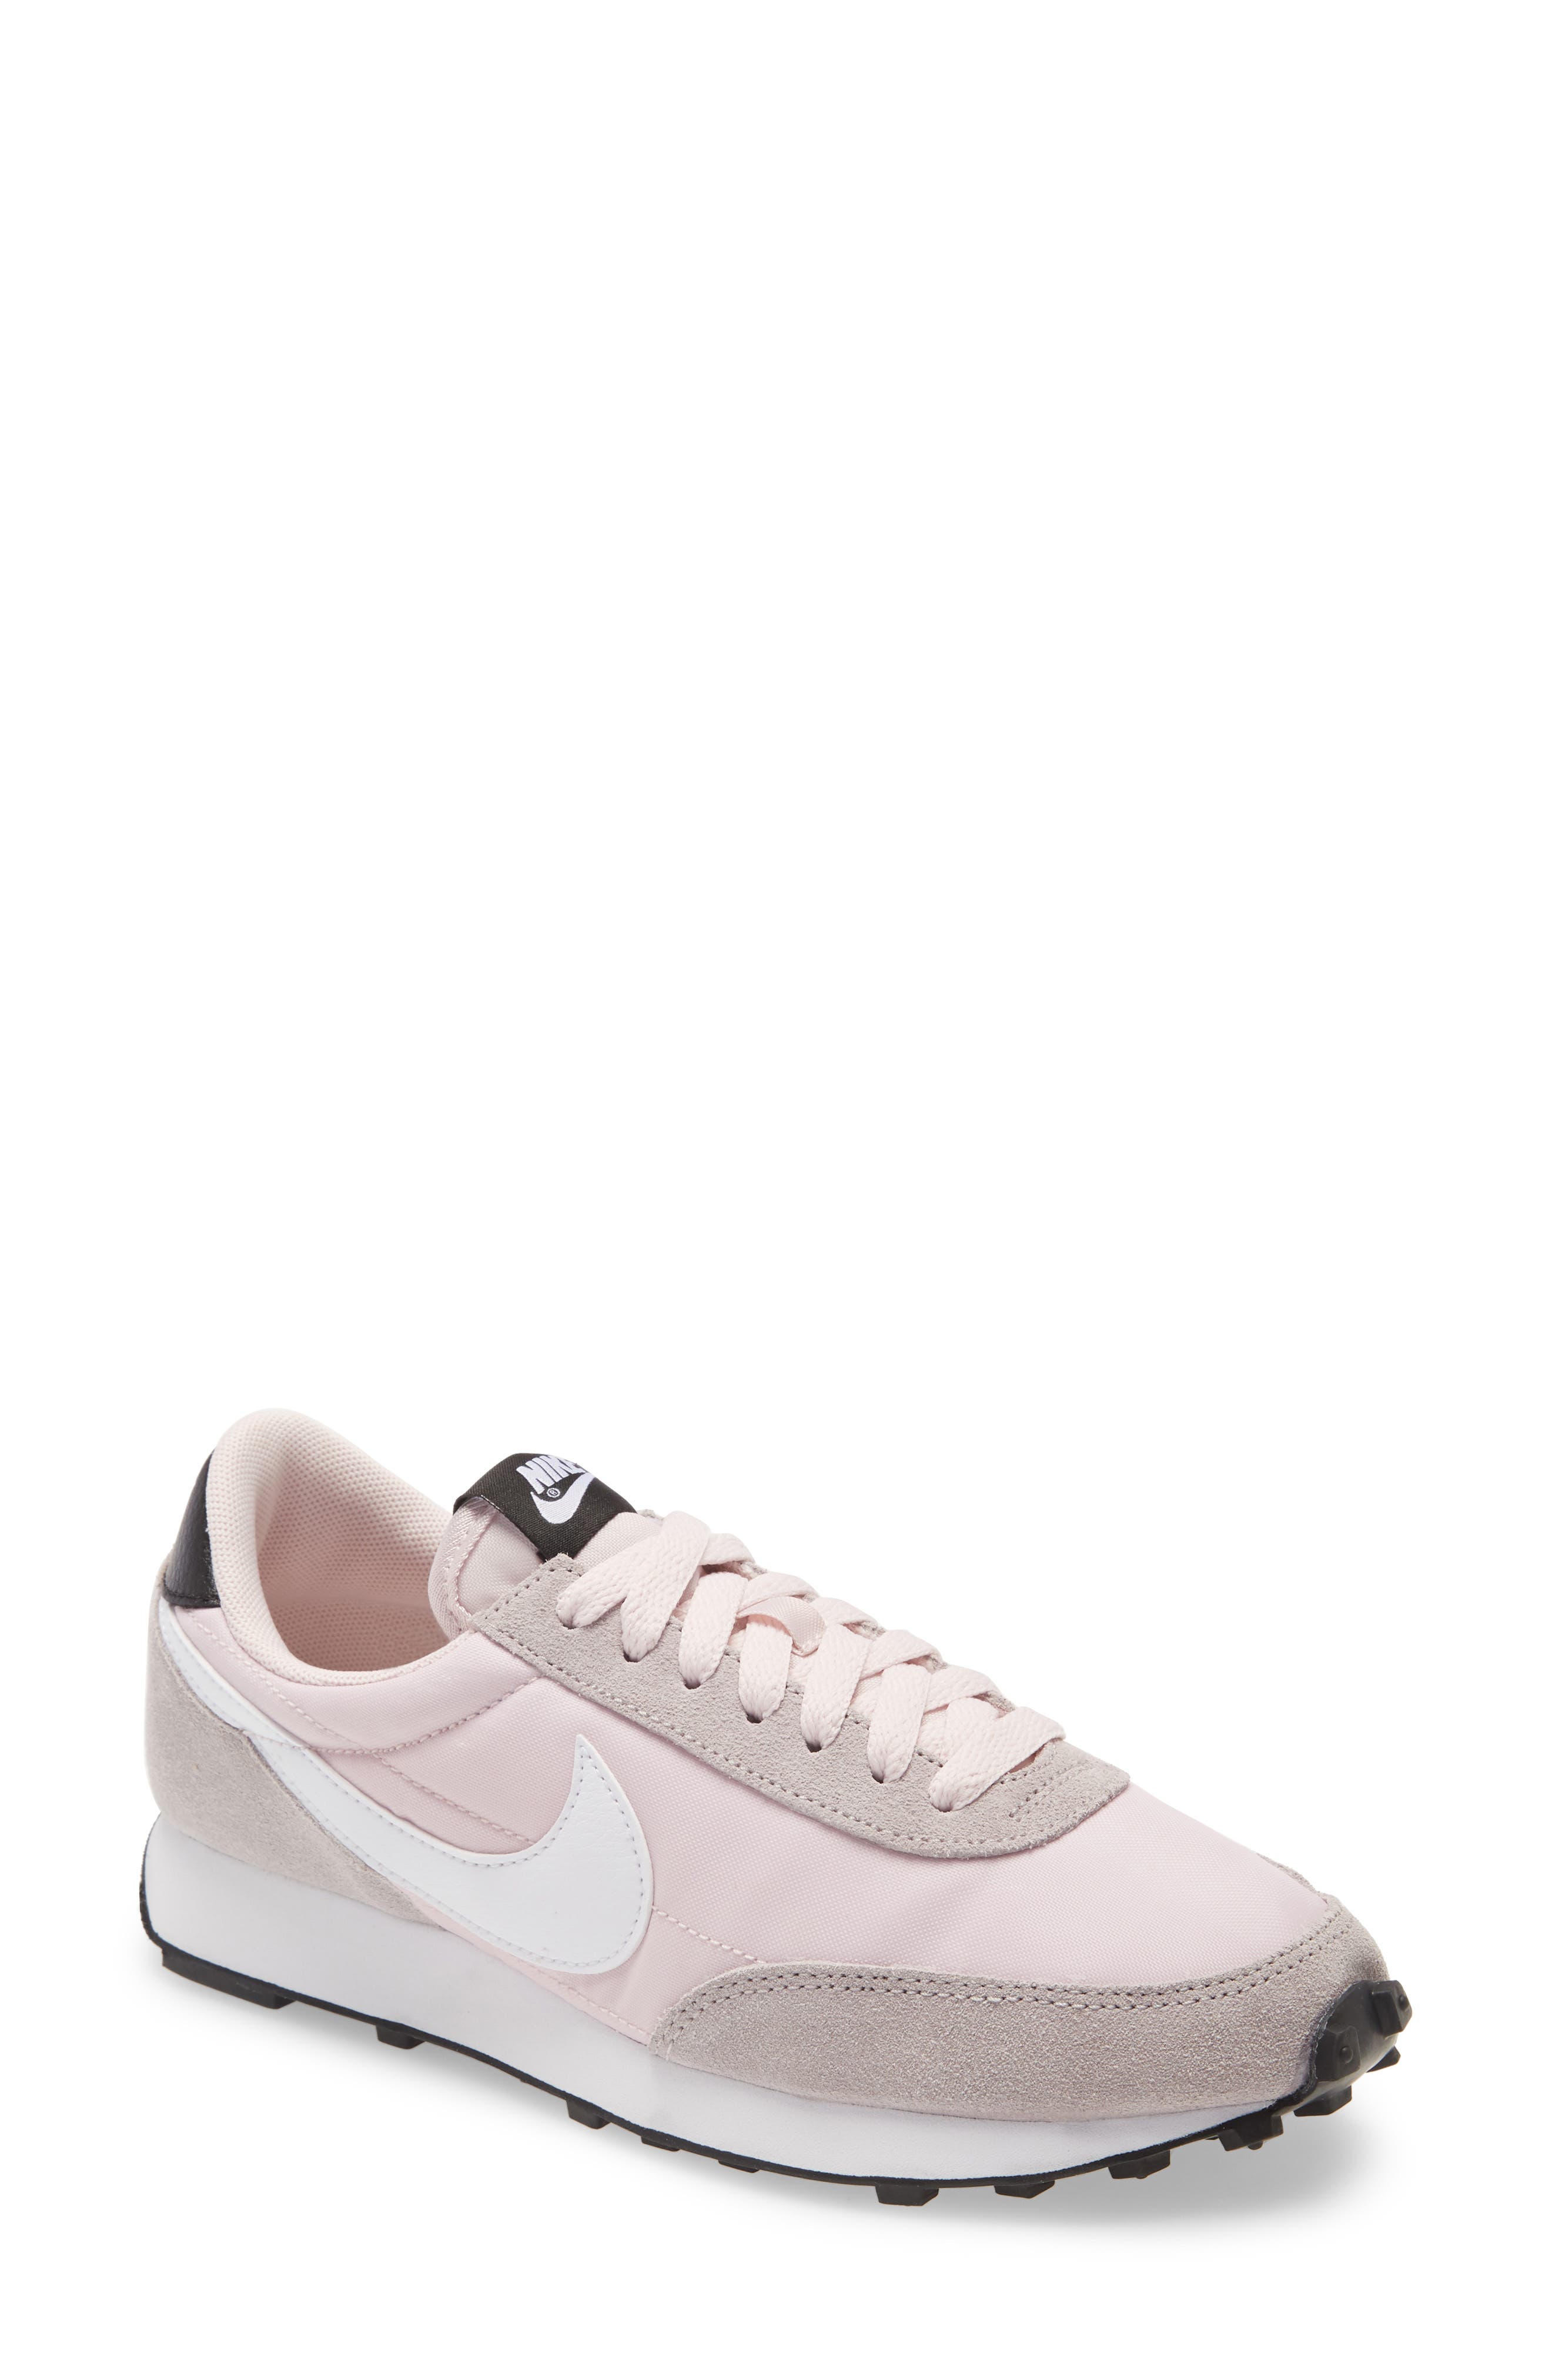 nike shoes pink womens